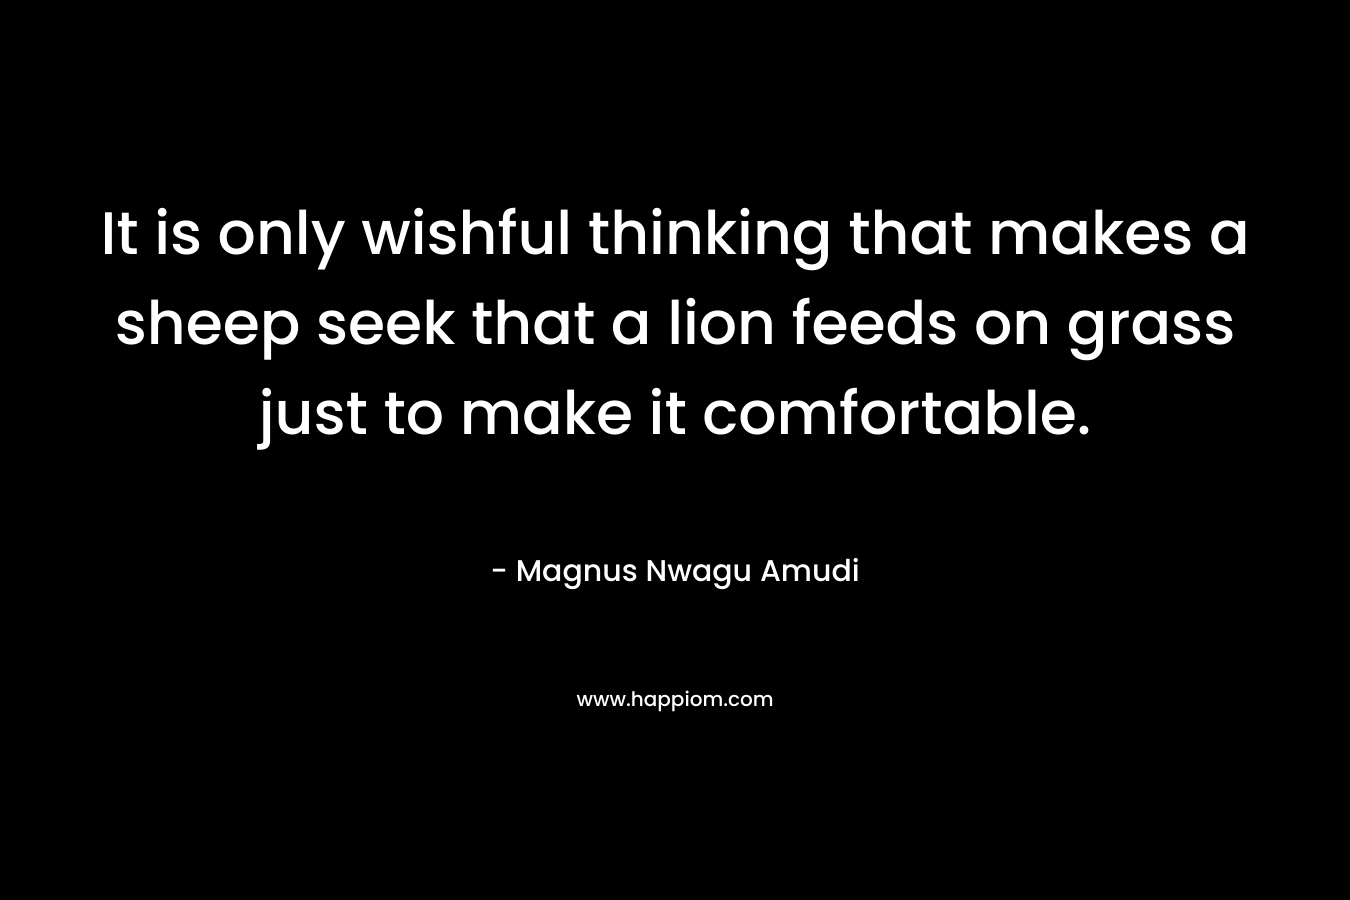 It is only wishful thinking that makes a sheep seek that a lion feeds on grass just to make it comfortable.